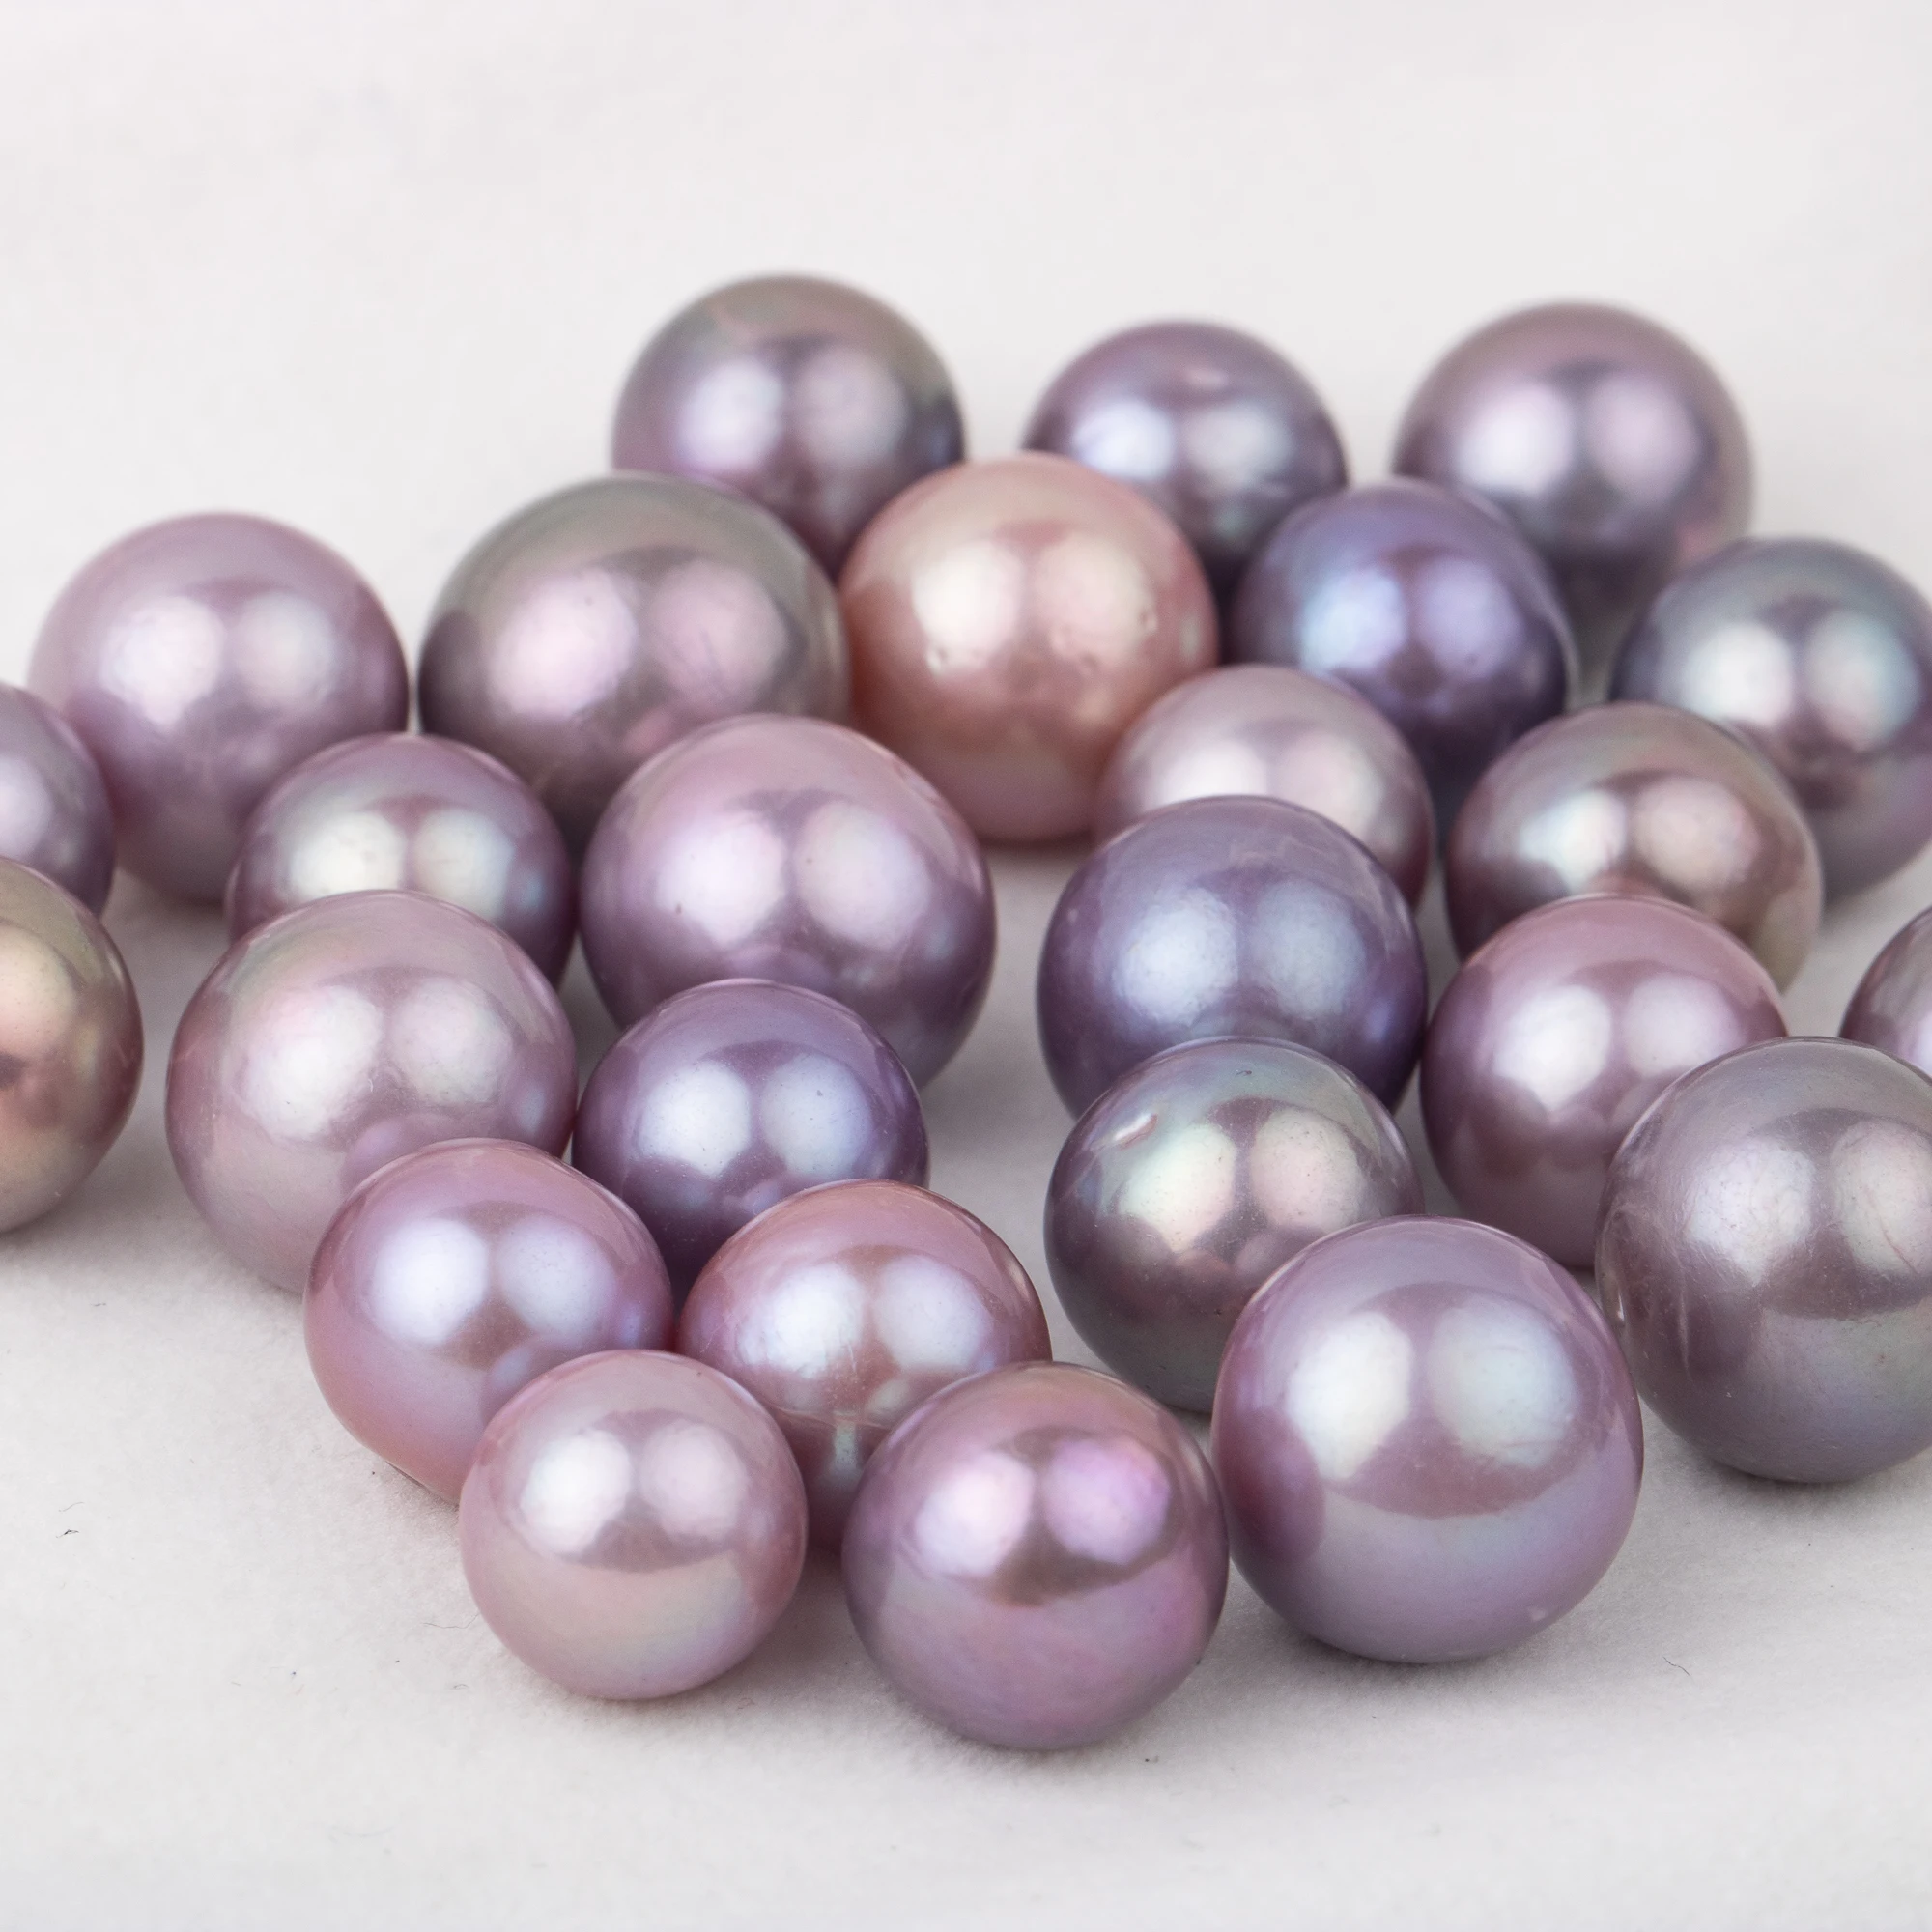 

9-12mm cultured purple Edison Pearl High quality loose freshwater pearl round shape